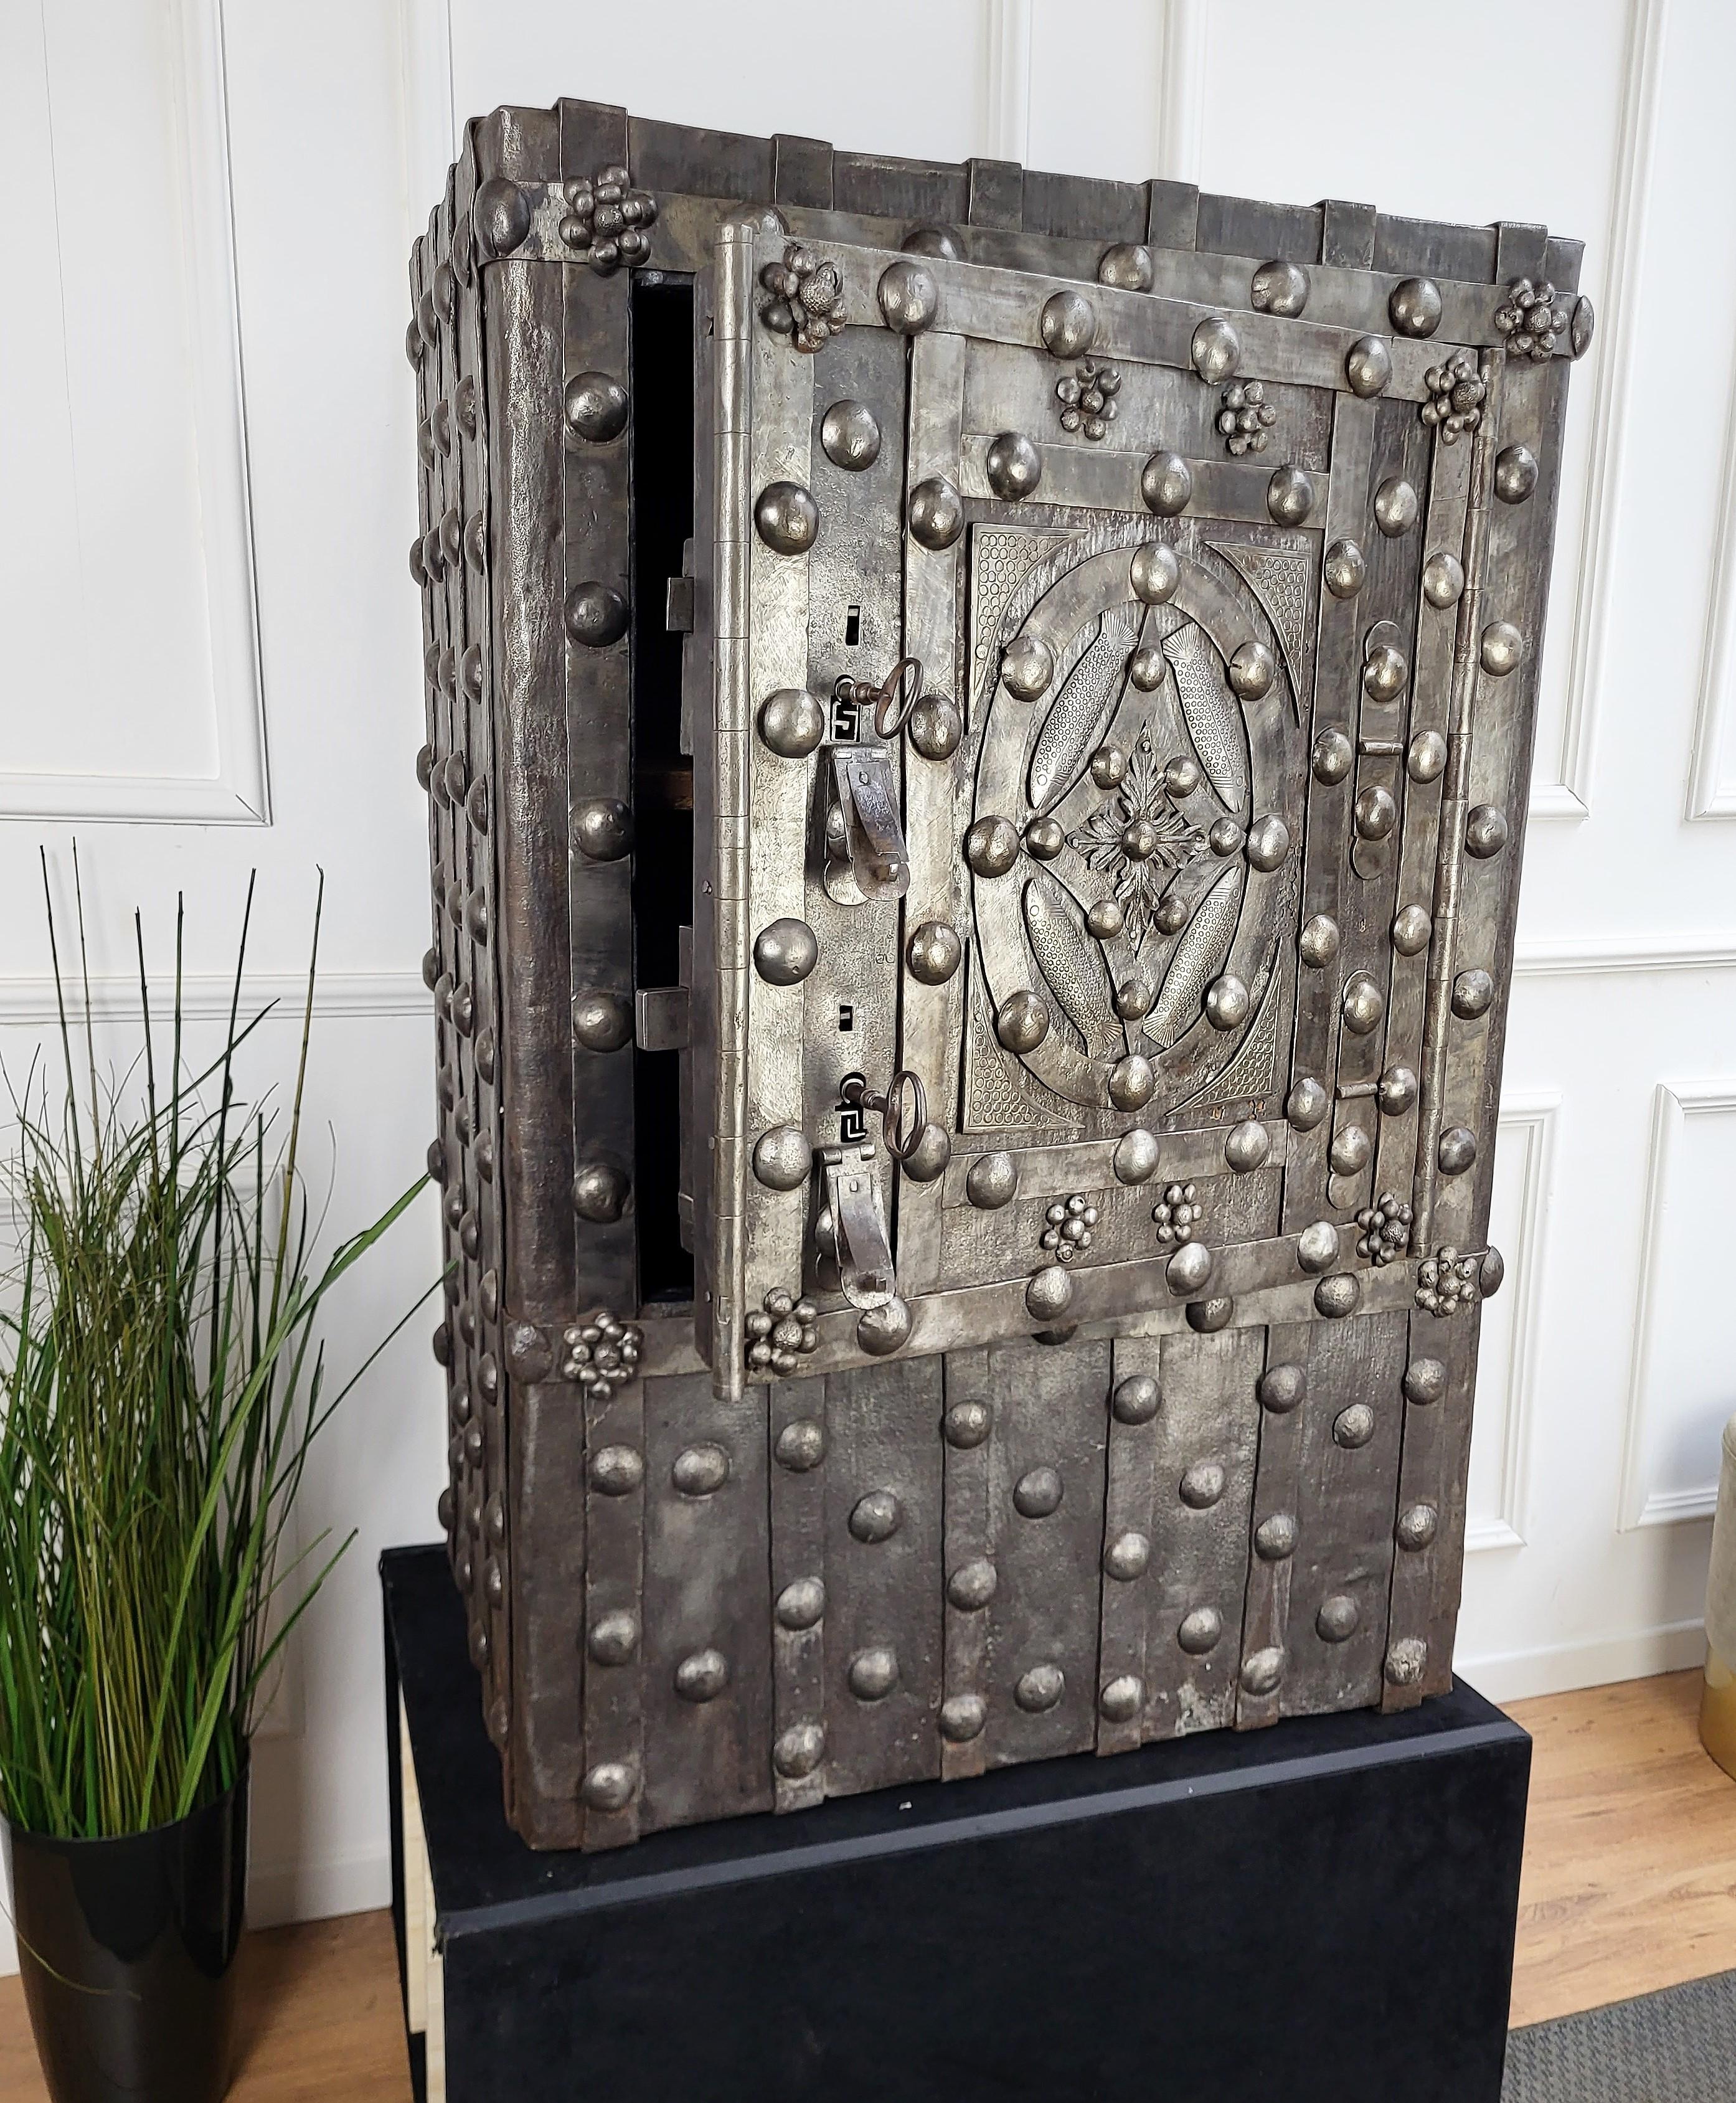 Beautiful and rare example of early 18th / late 17th Century Italian master blacksmith craftsmanship, this antique studded safe with typical all-around hobnails and great wrought iron details, has a fabulous central decor with the 4 fishes as well